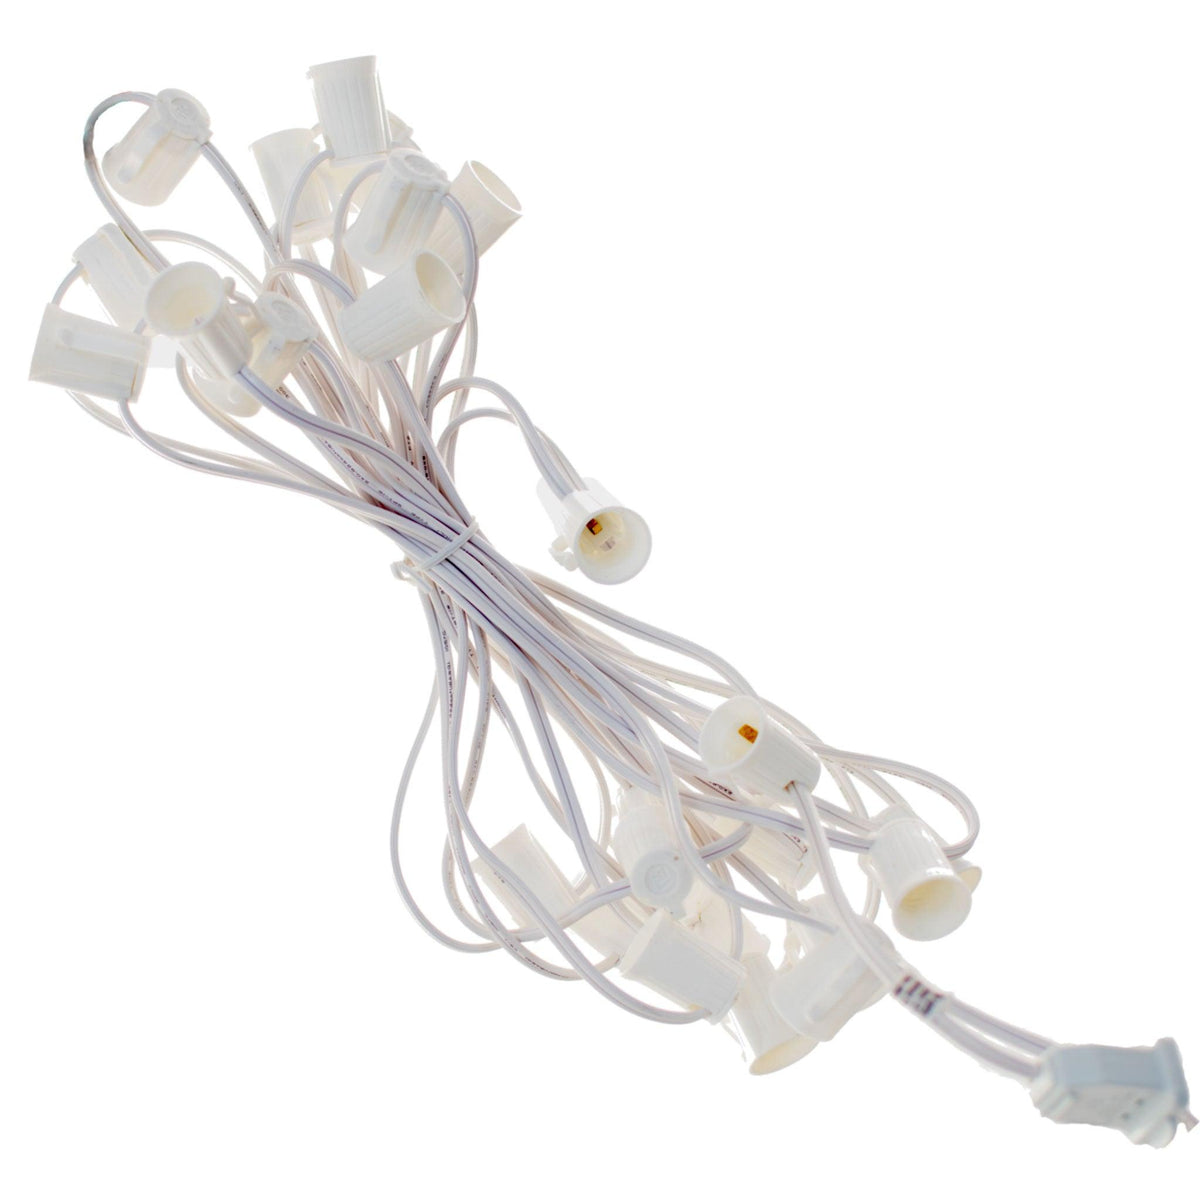 Lee Display offers your favorite Multi-Color 4th of July Red, White and Blue Lights sold with a 25FT Patio String Cord in a set!  On sale now at leedisplay.com